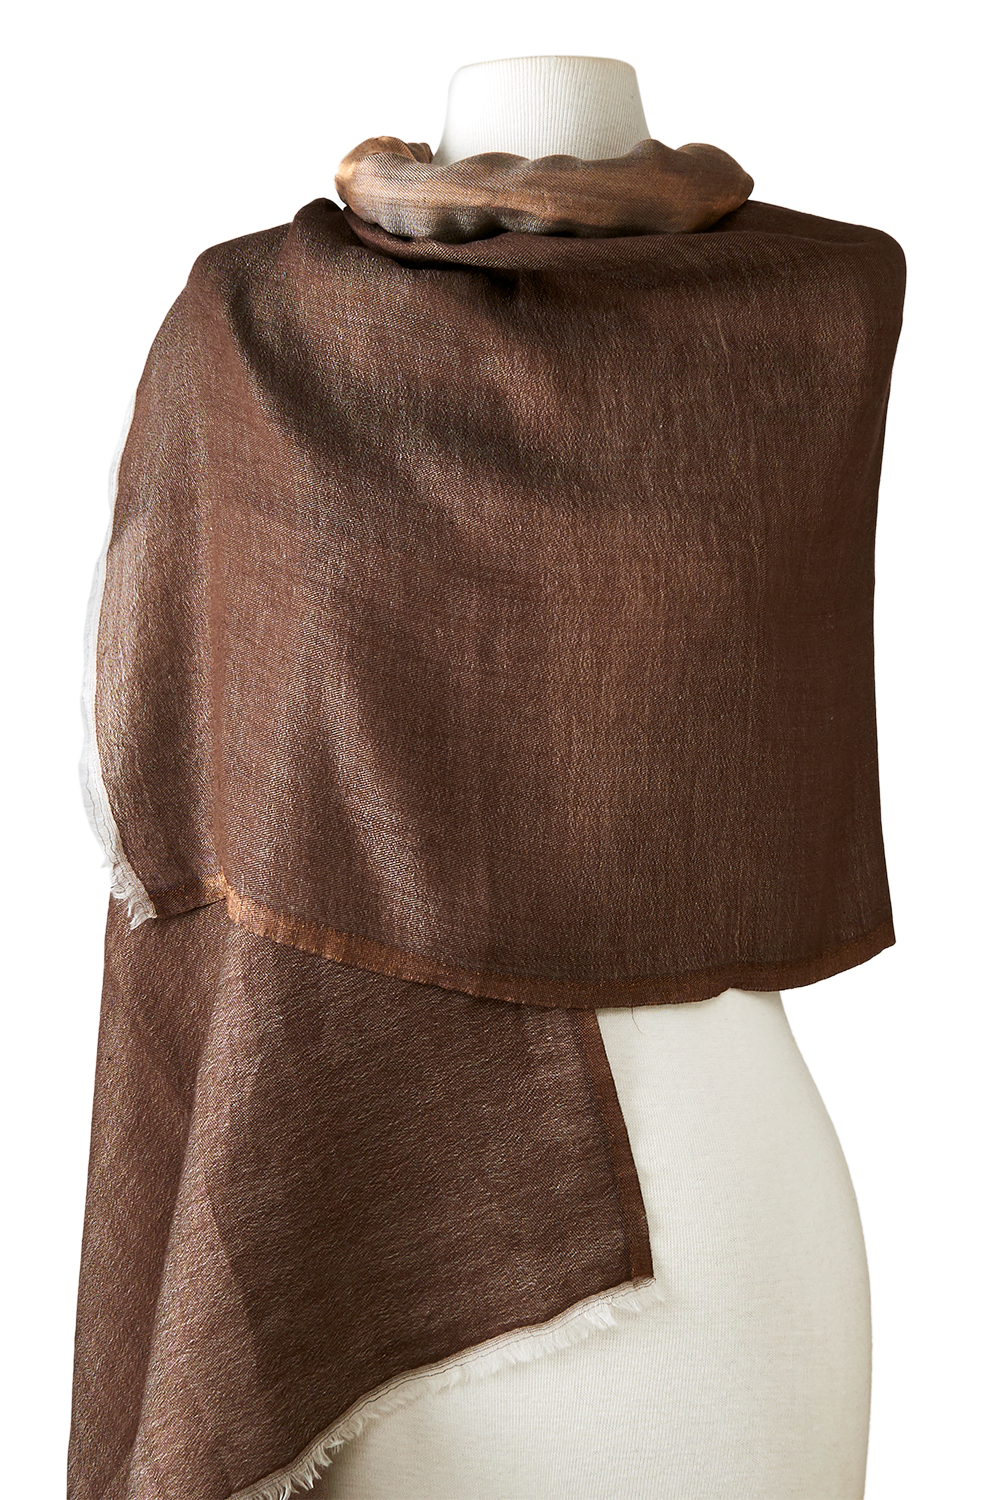 Double Sided Cashmere with Brown Silk Zari | 75X200cm